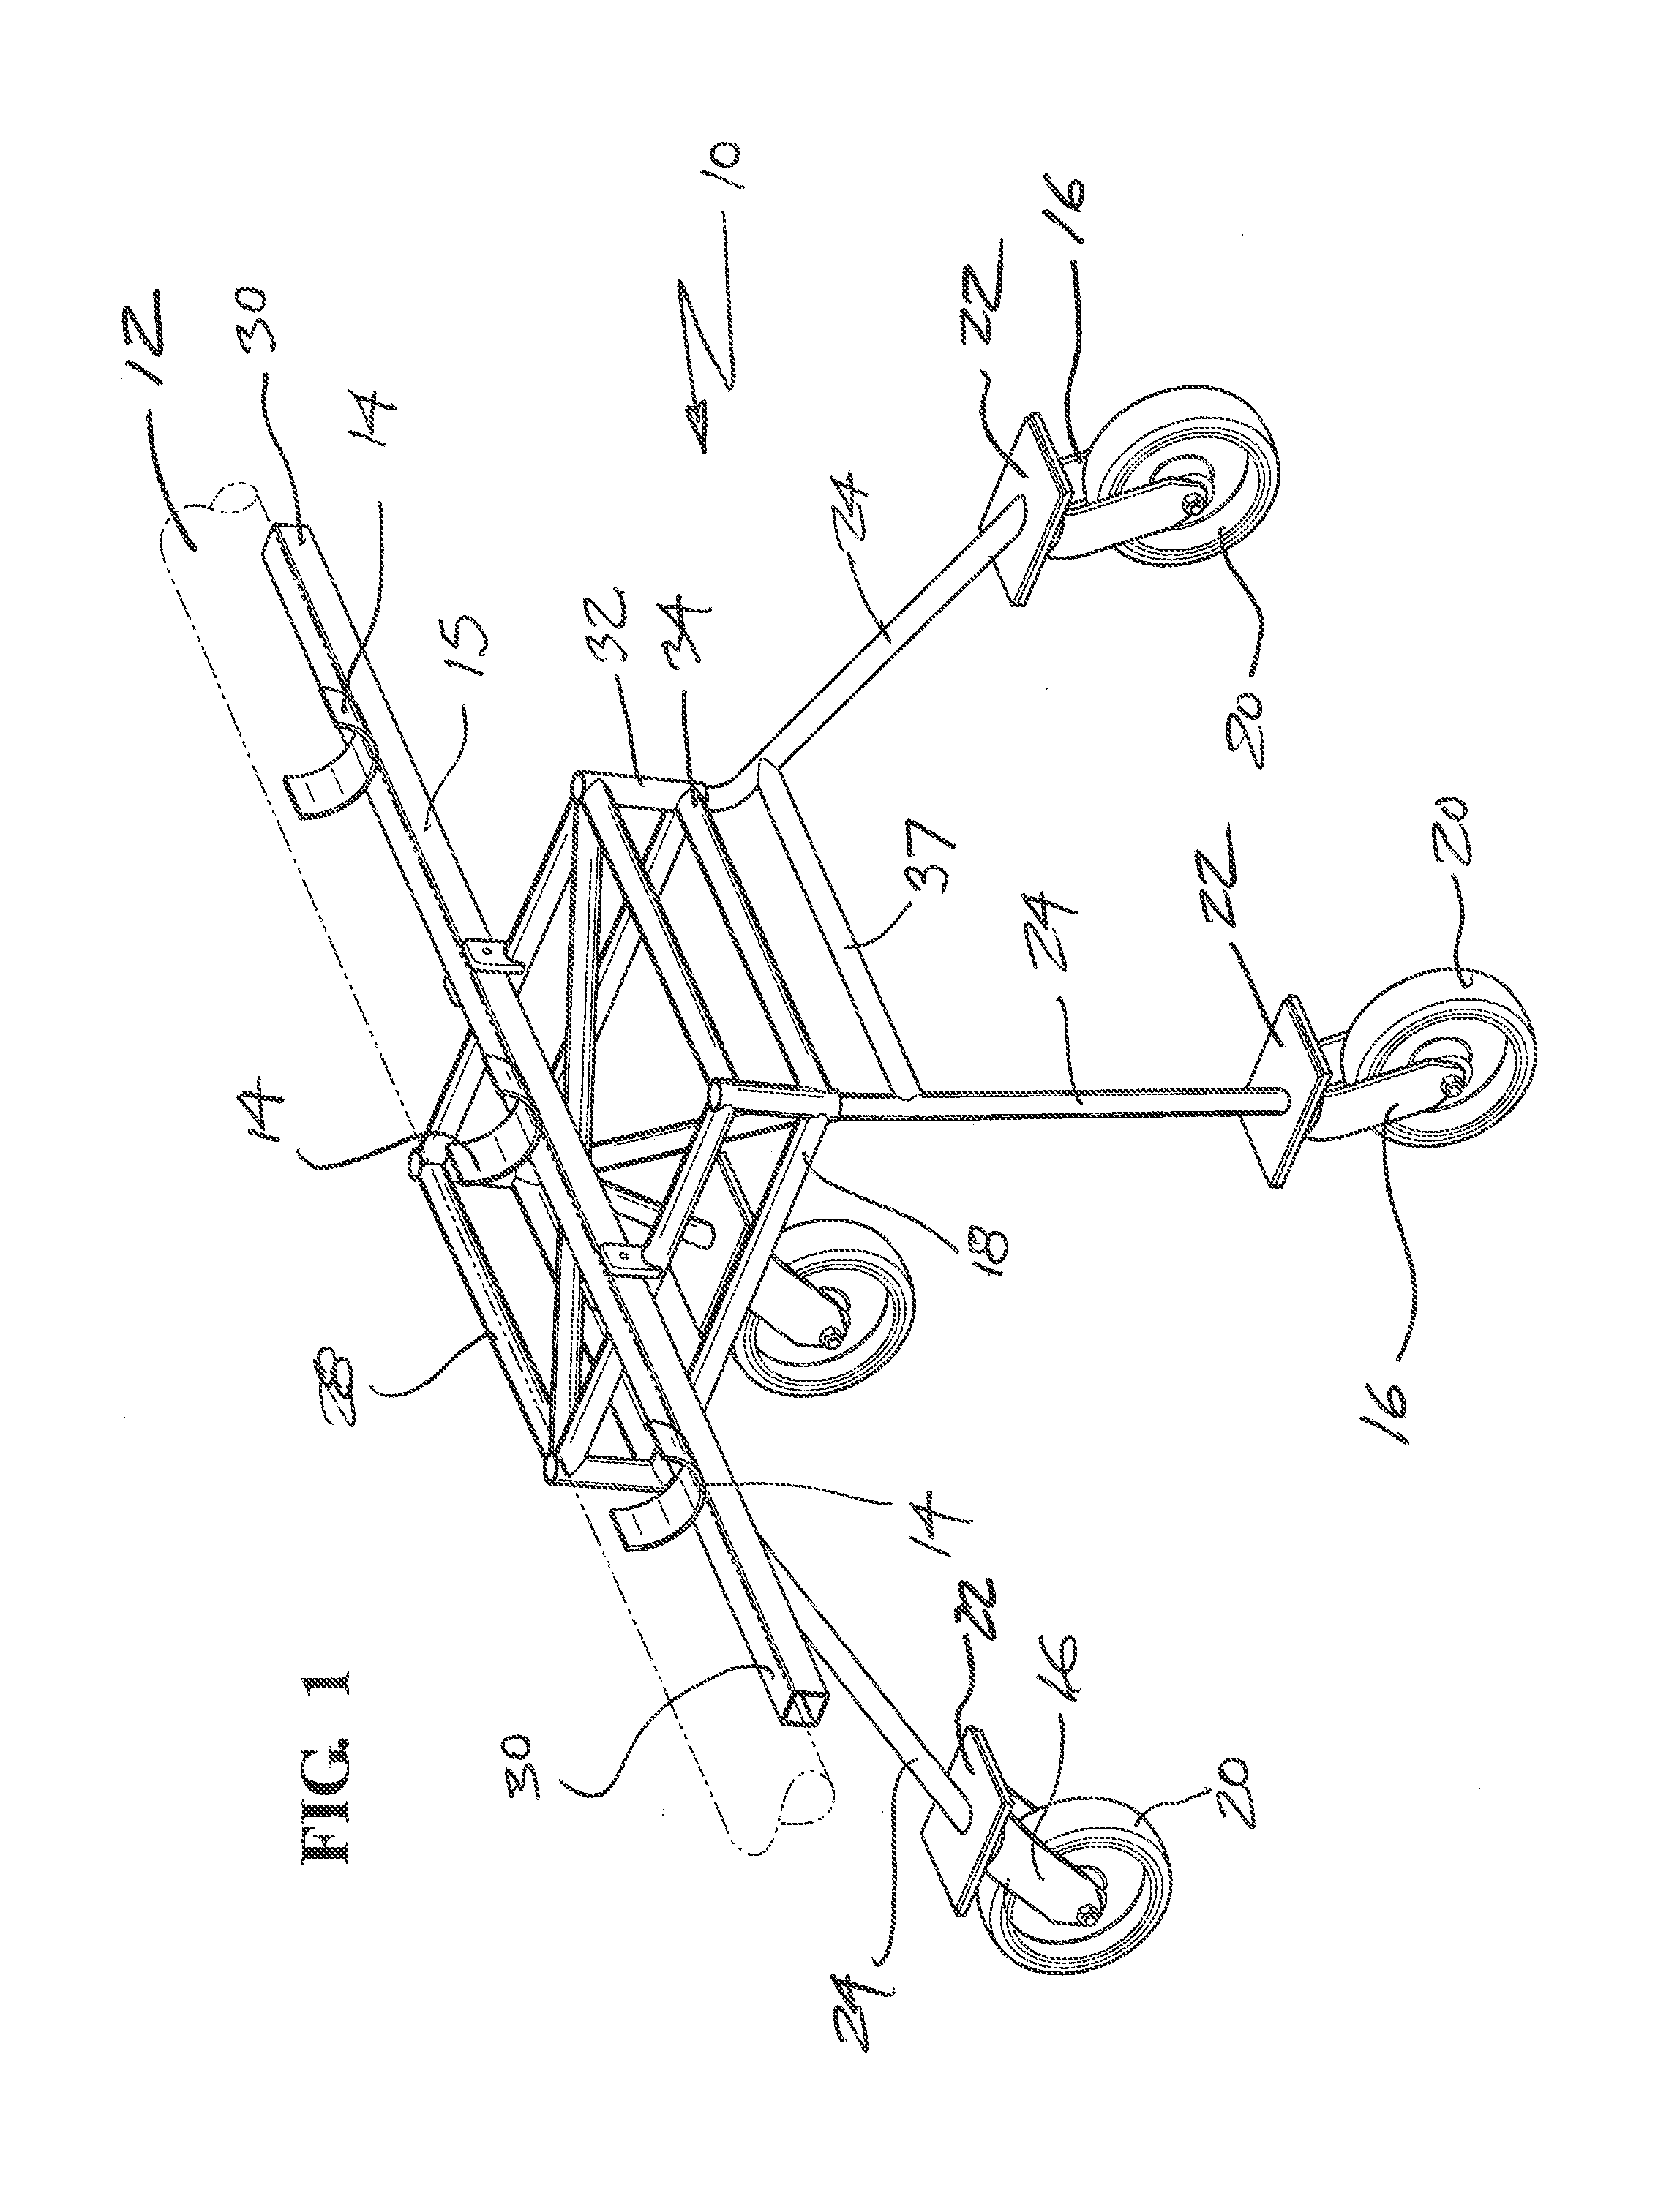 System for manipulating concrete spreading hoses